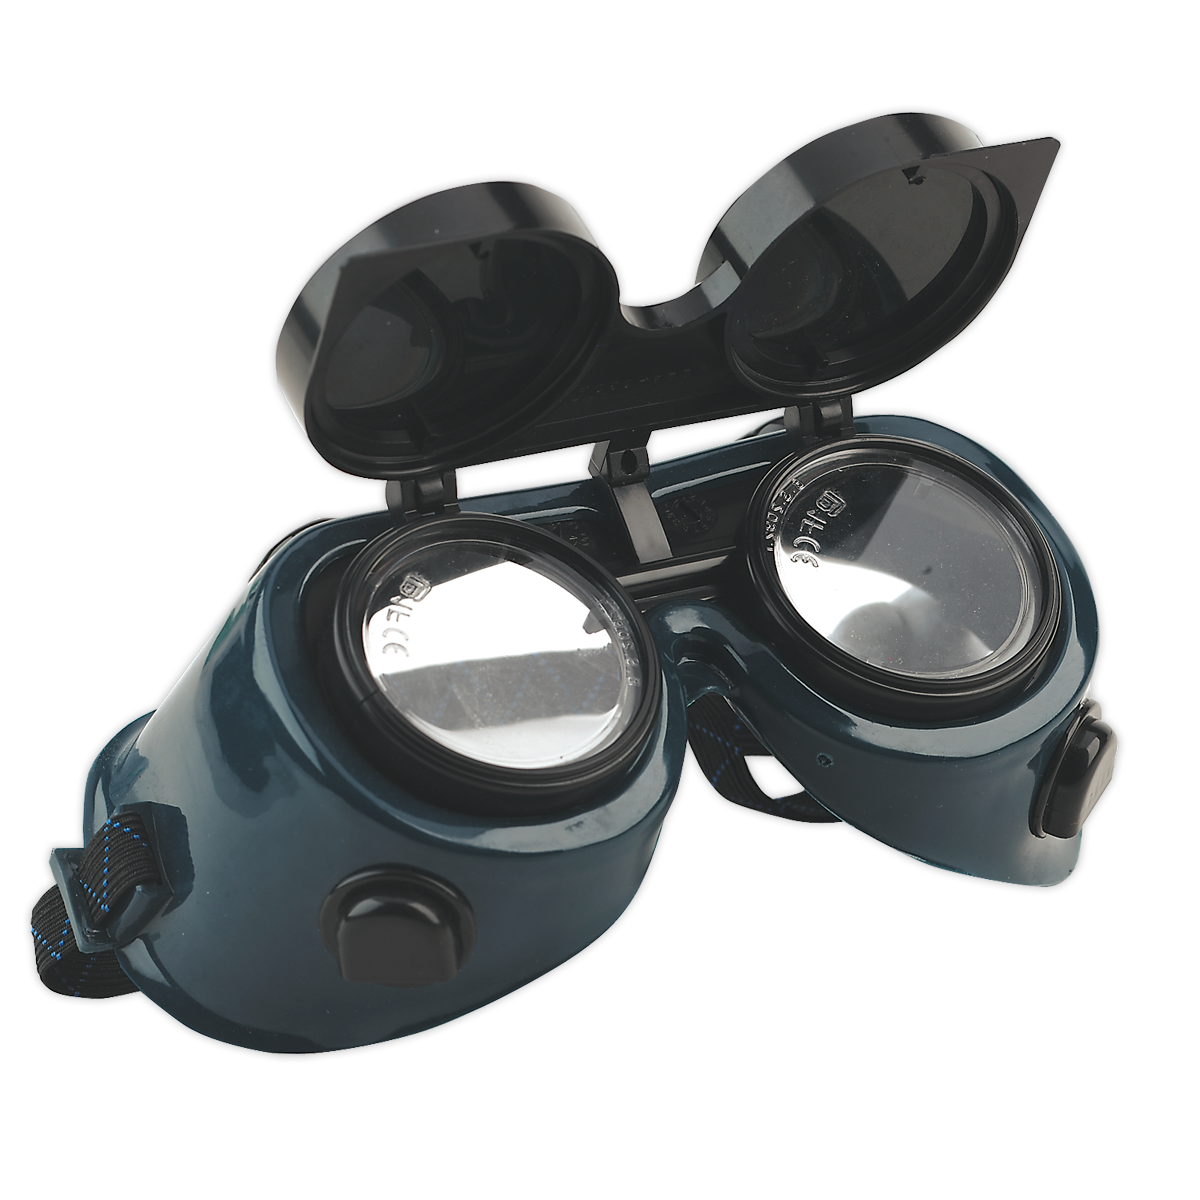 SEALEY - SSP6 Gas Welding Goggles with Flip-Up Lenses